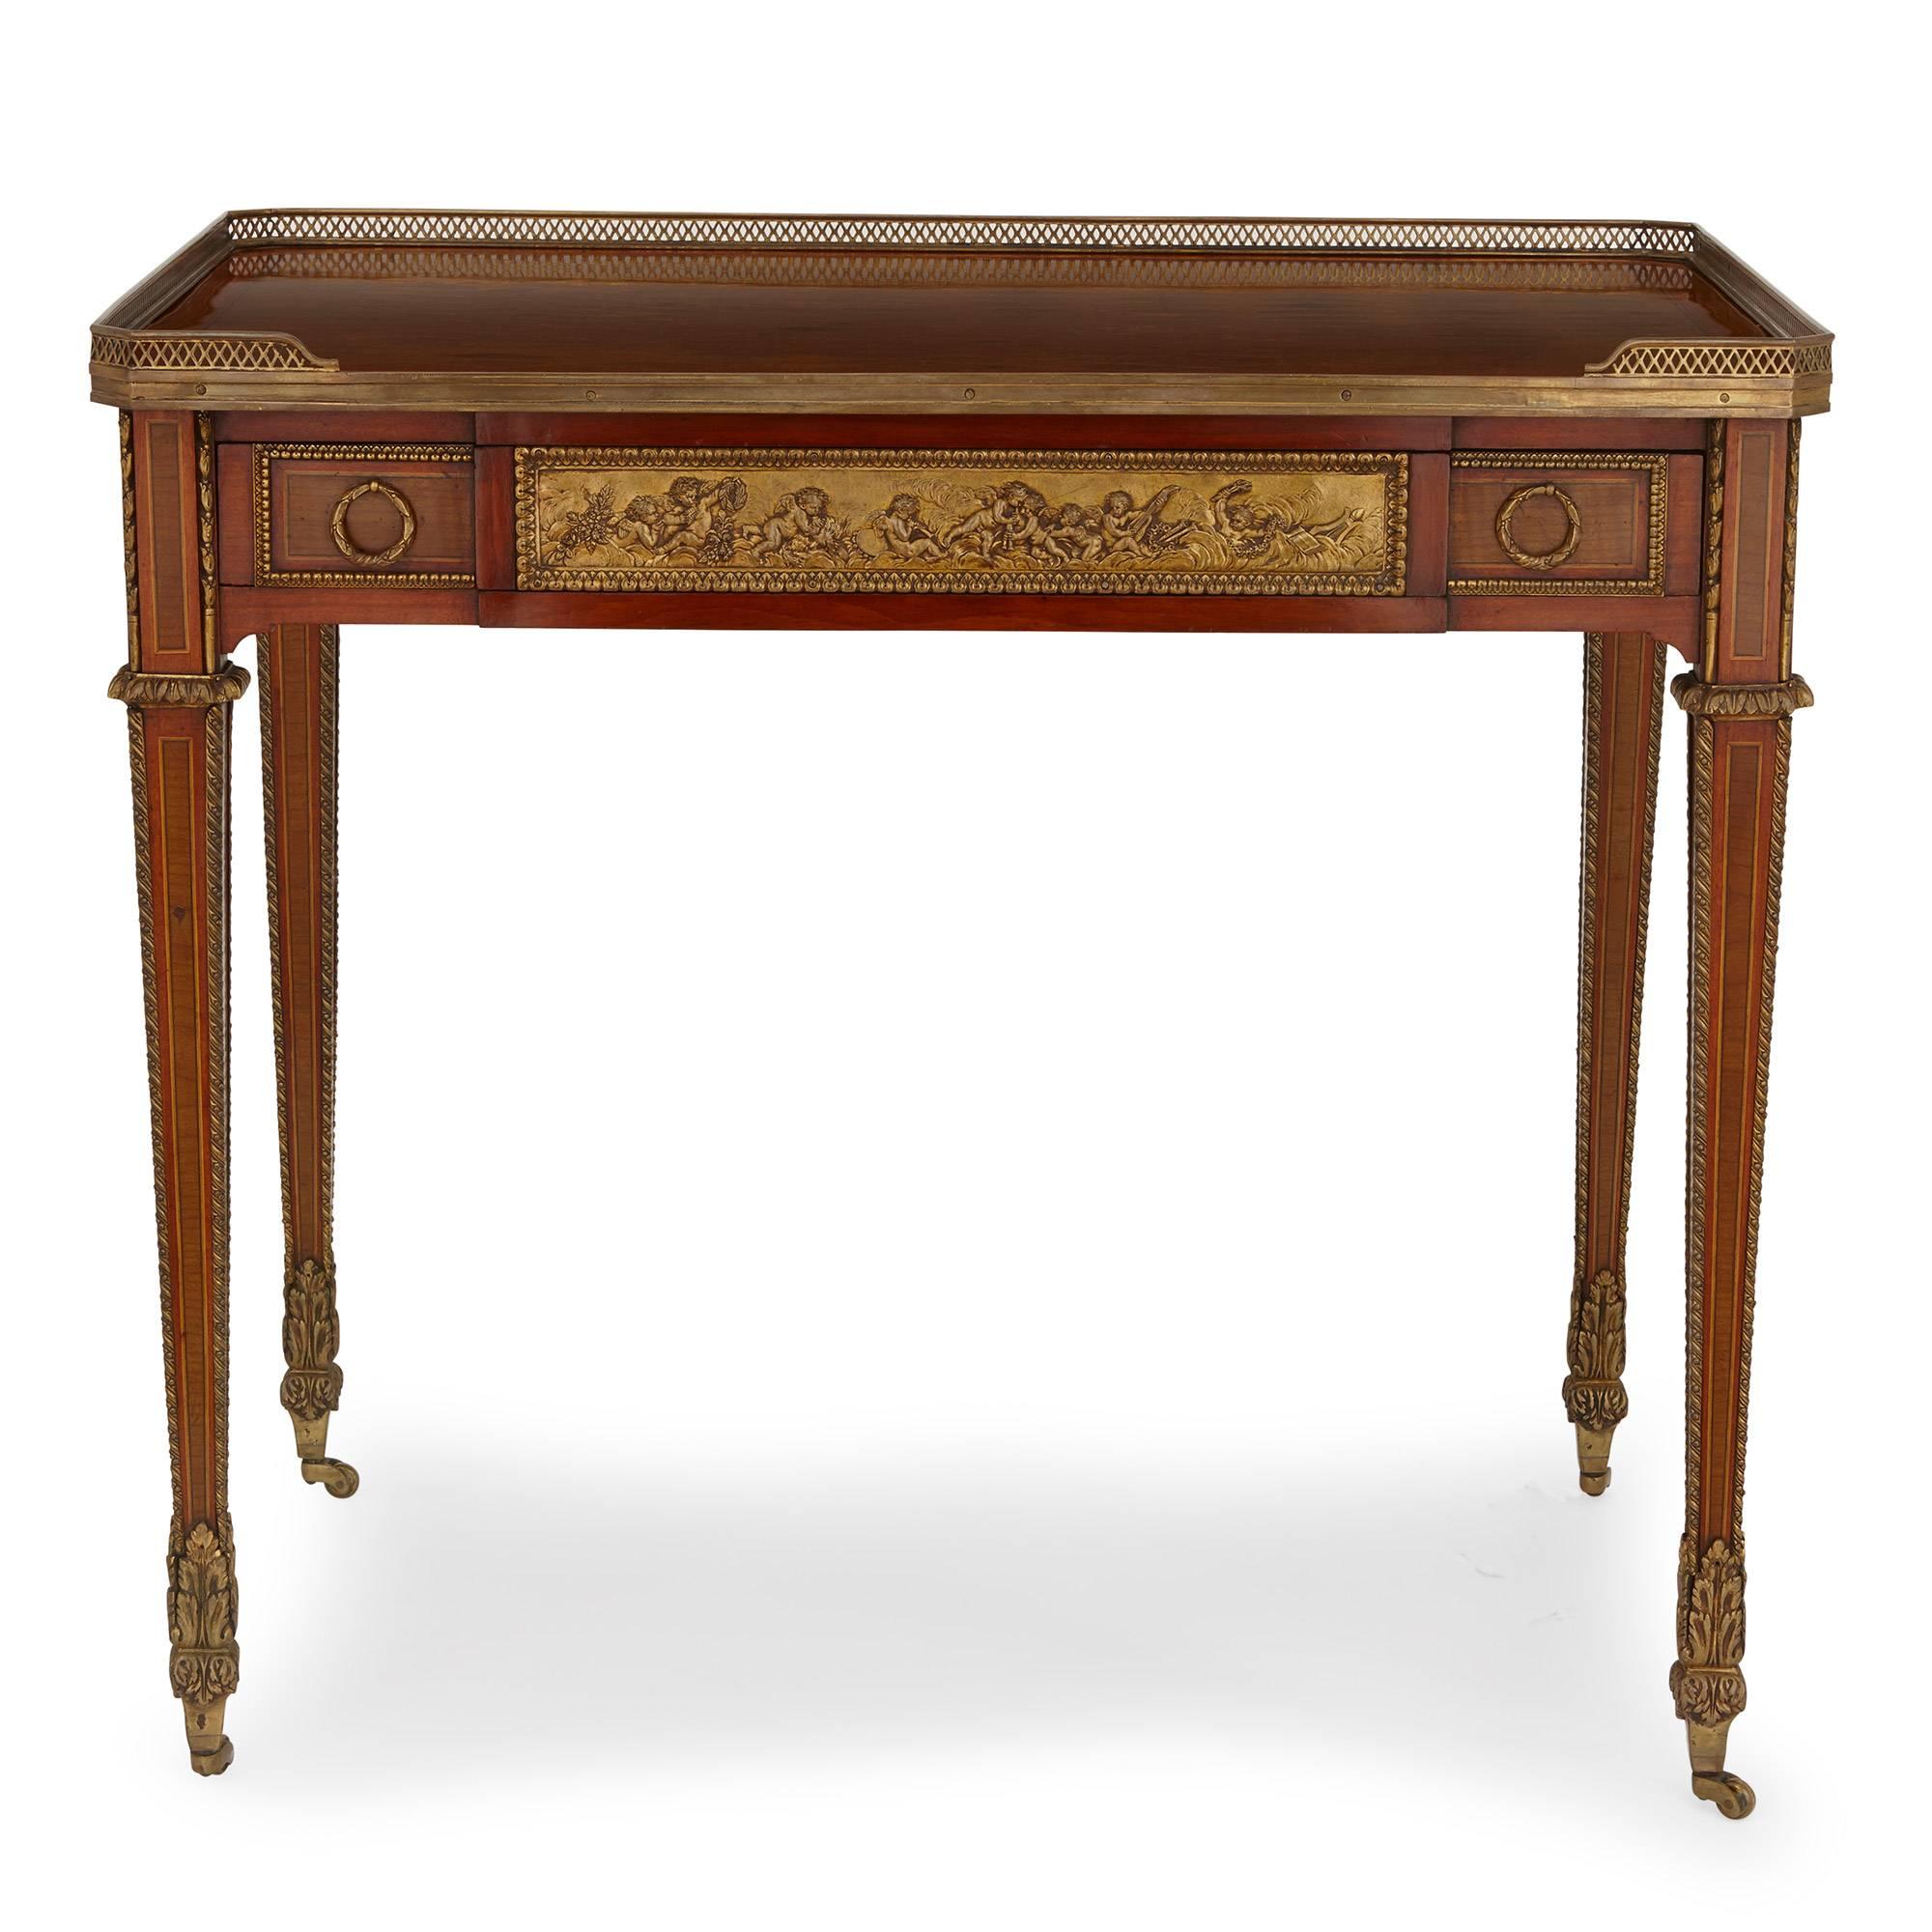 This antique ormolu-mounted writing table was crafted with intricate parquetry detailing, and was built after the model by celebrated French maker Jean-Henri Riesener (1734-1806). Riesener was a favourite maker of Queen Marie Antoinette, and this